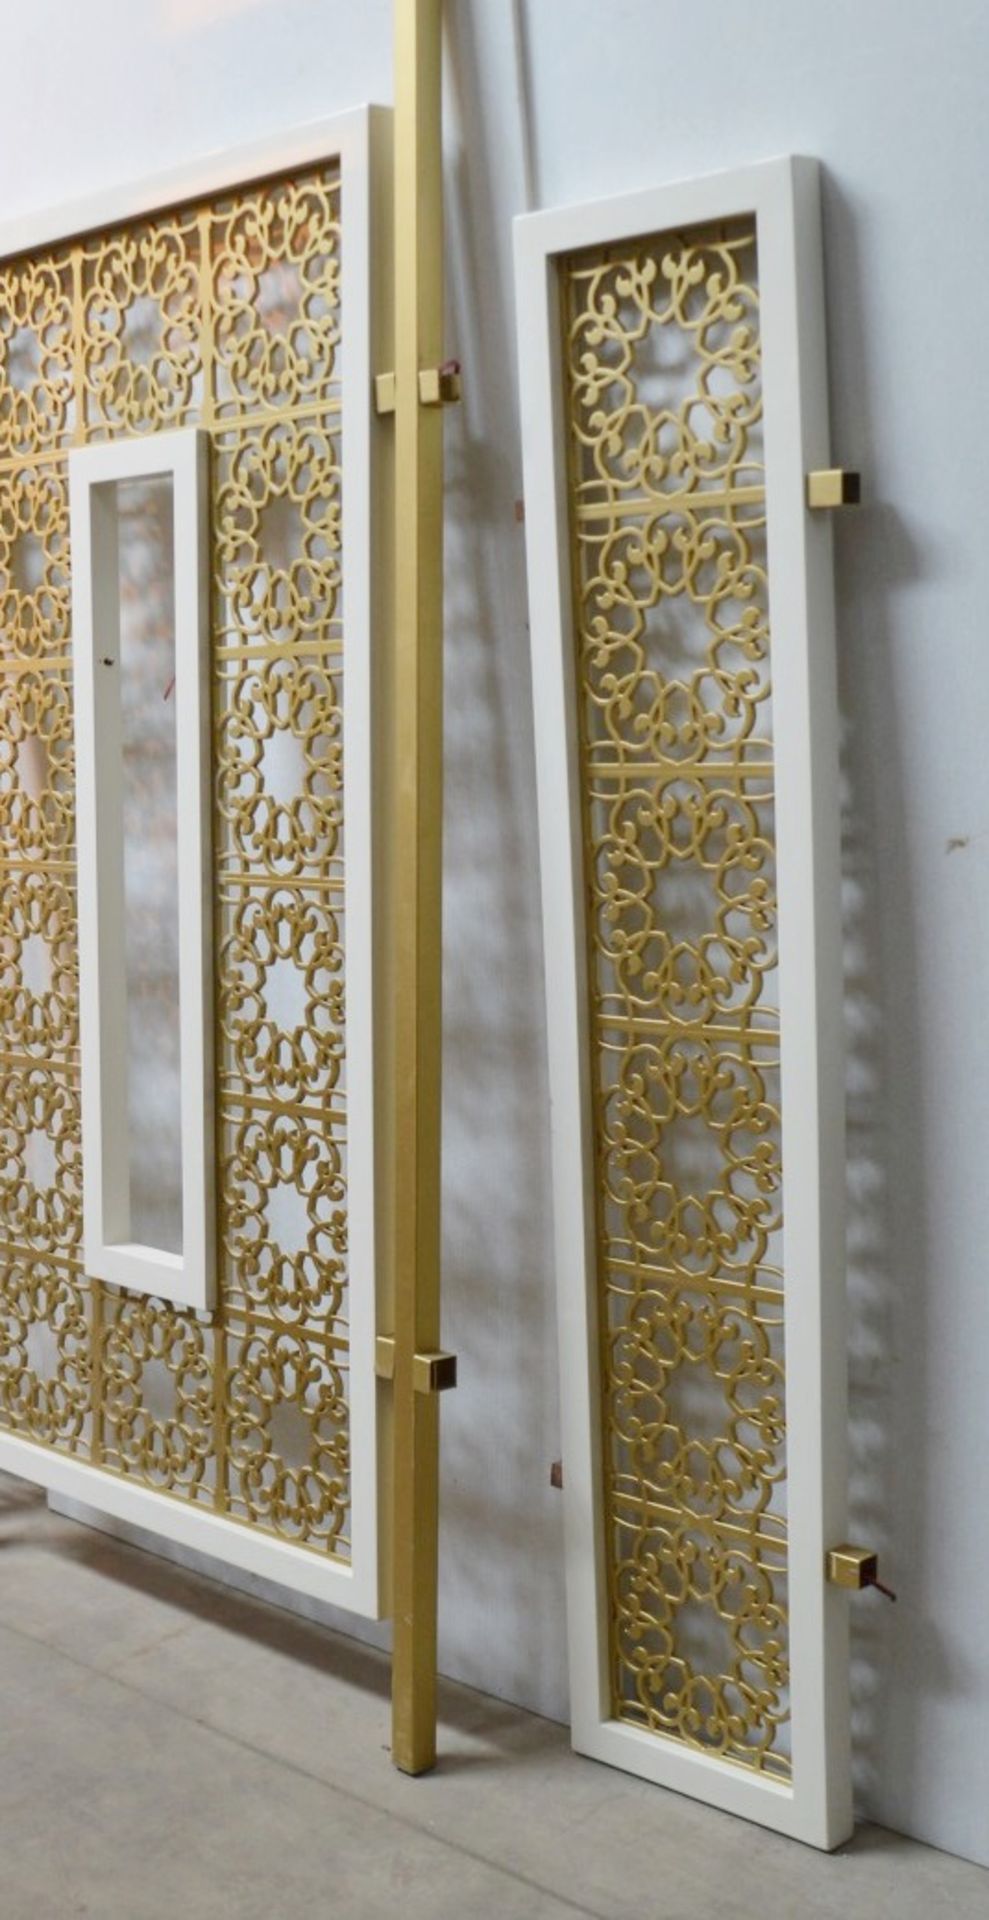 A Set Of 3 x Moroccan-style Room Divider Screen Panels With Pendant Light - Ref: HMS108 - CL668 - - Image 4 of 10